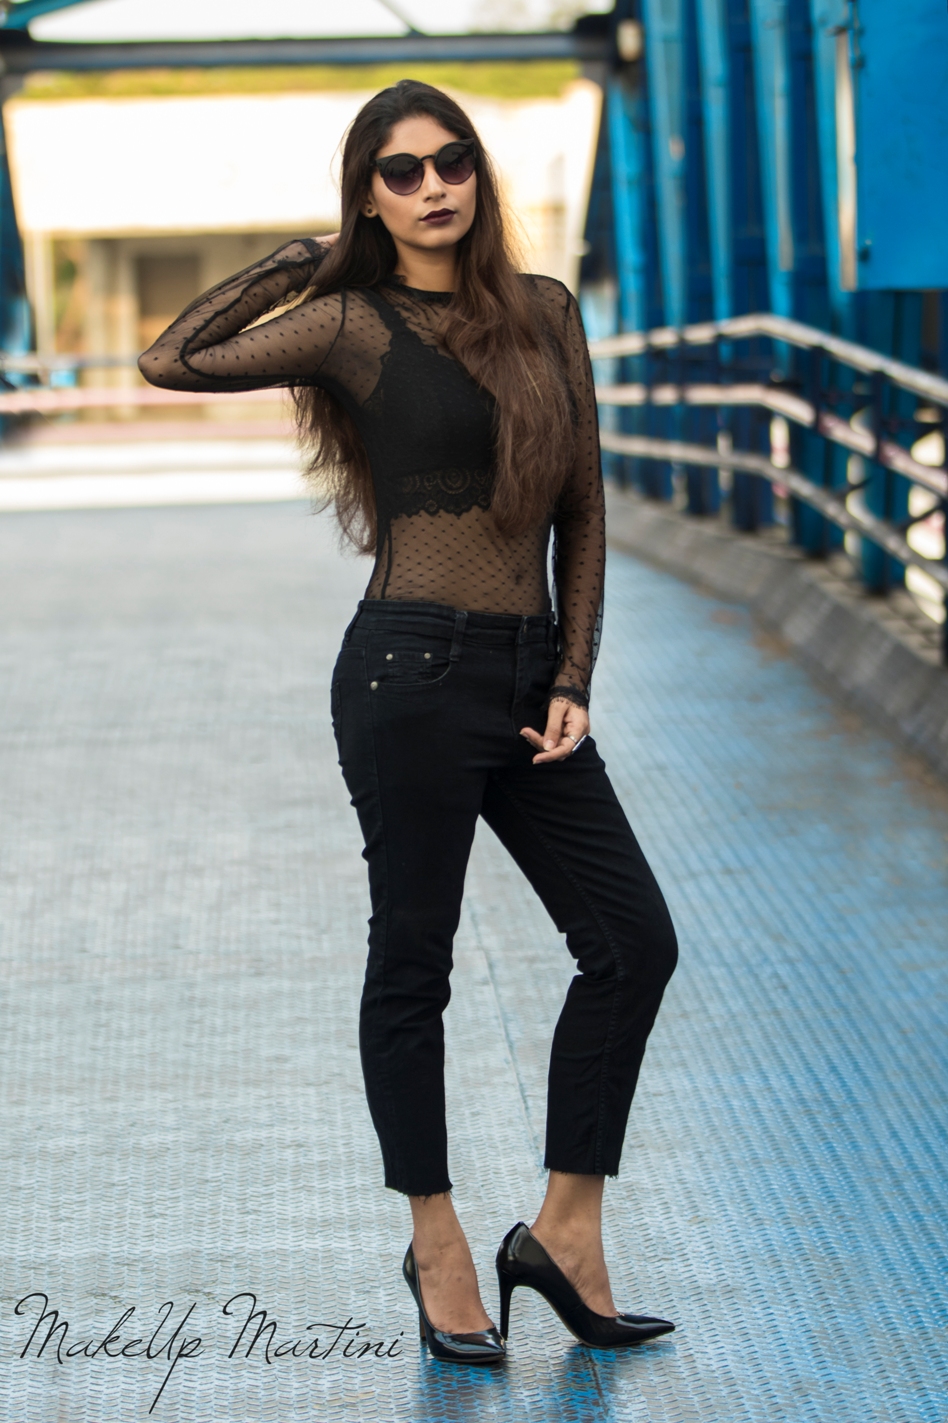 Black Mesh Top Outfit Idea - Bestkeptstyle